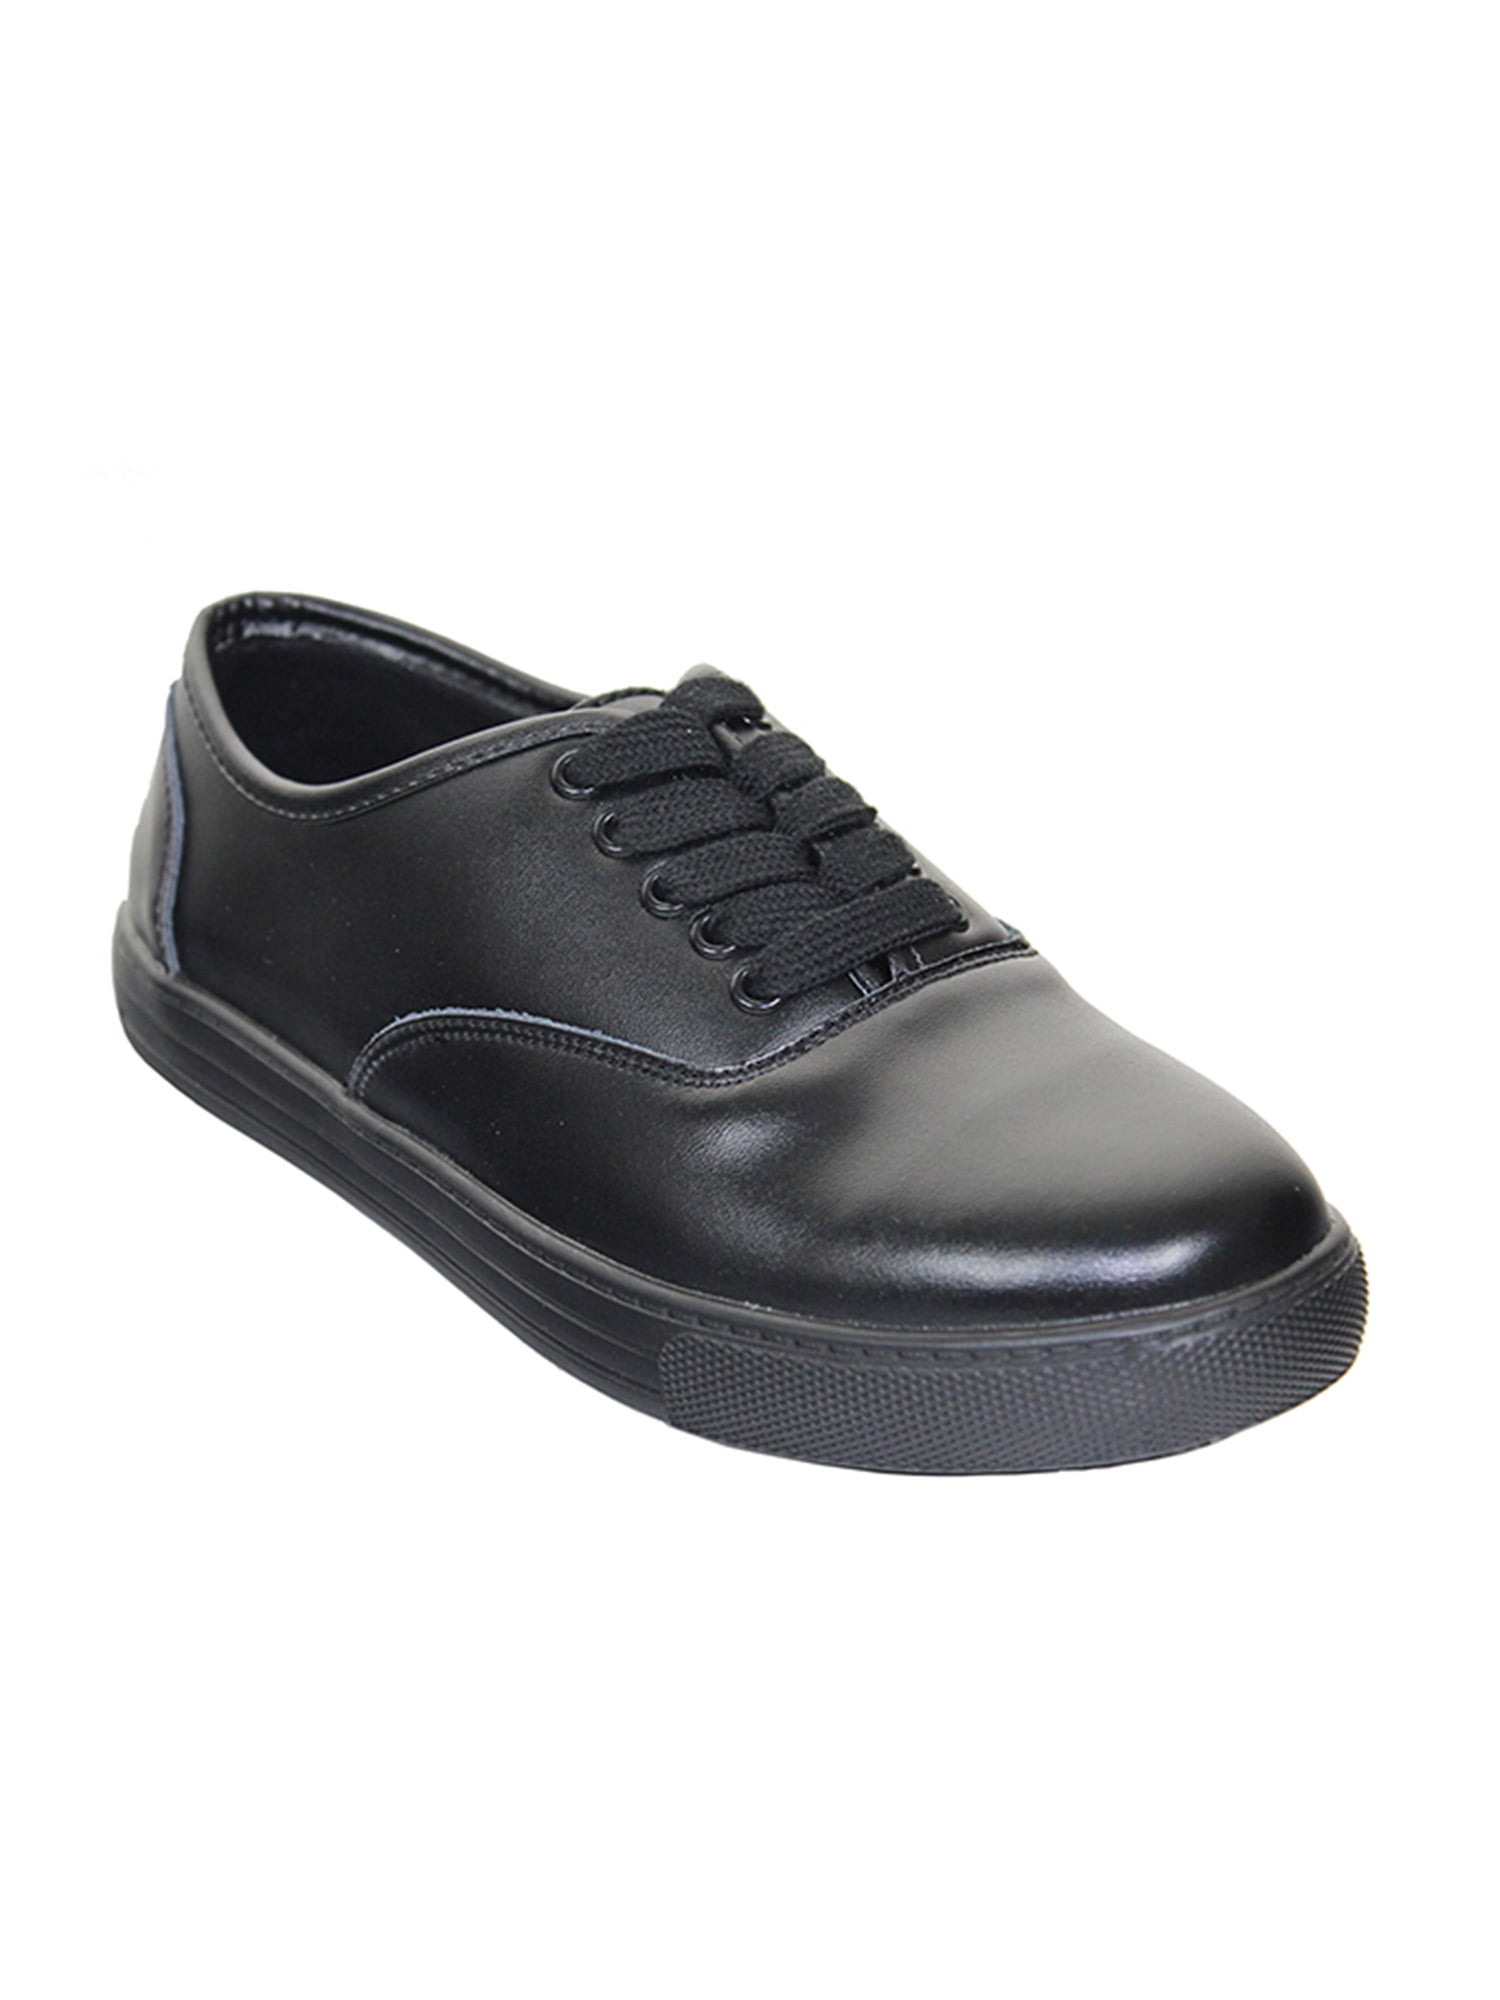 Womens Slip Resistant Work Shoes Black Lace Up Comfortable Leather Shoes Oil Resistant Safety 